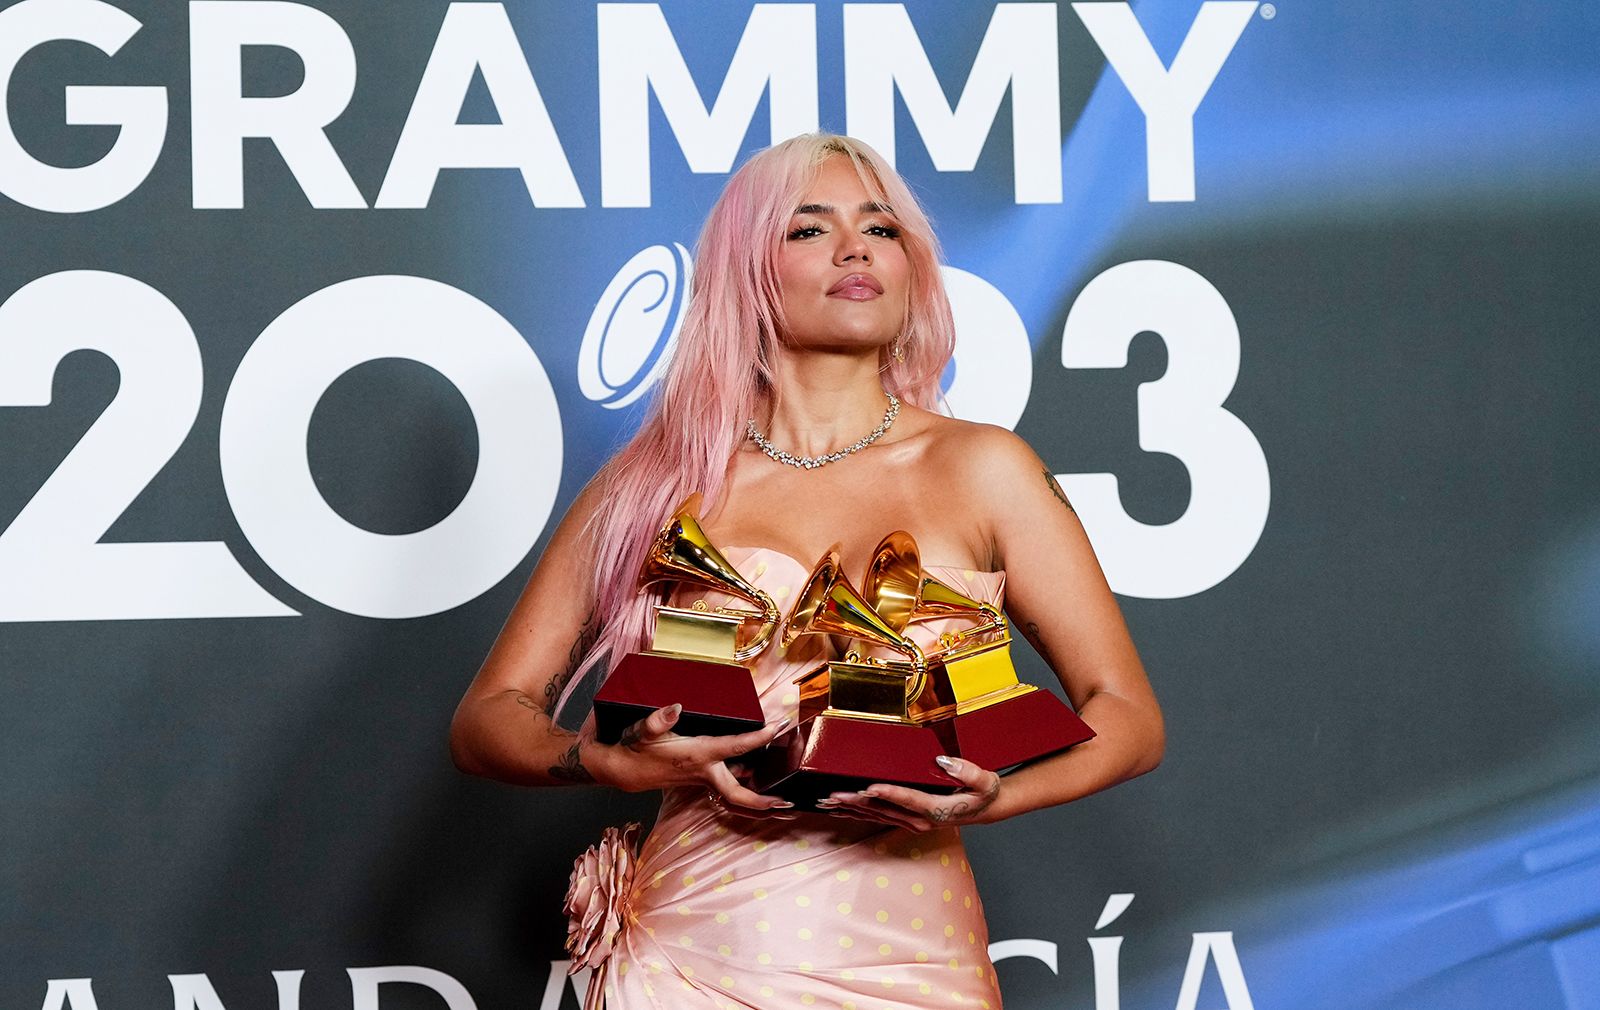 Jet carrying Grammy-winning artist Karol G makes emergency landing - Accidents and Disasters - News